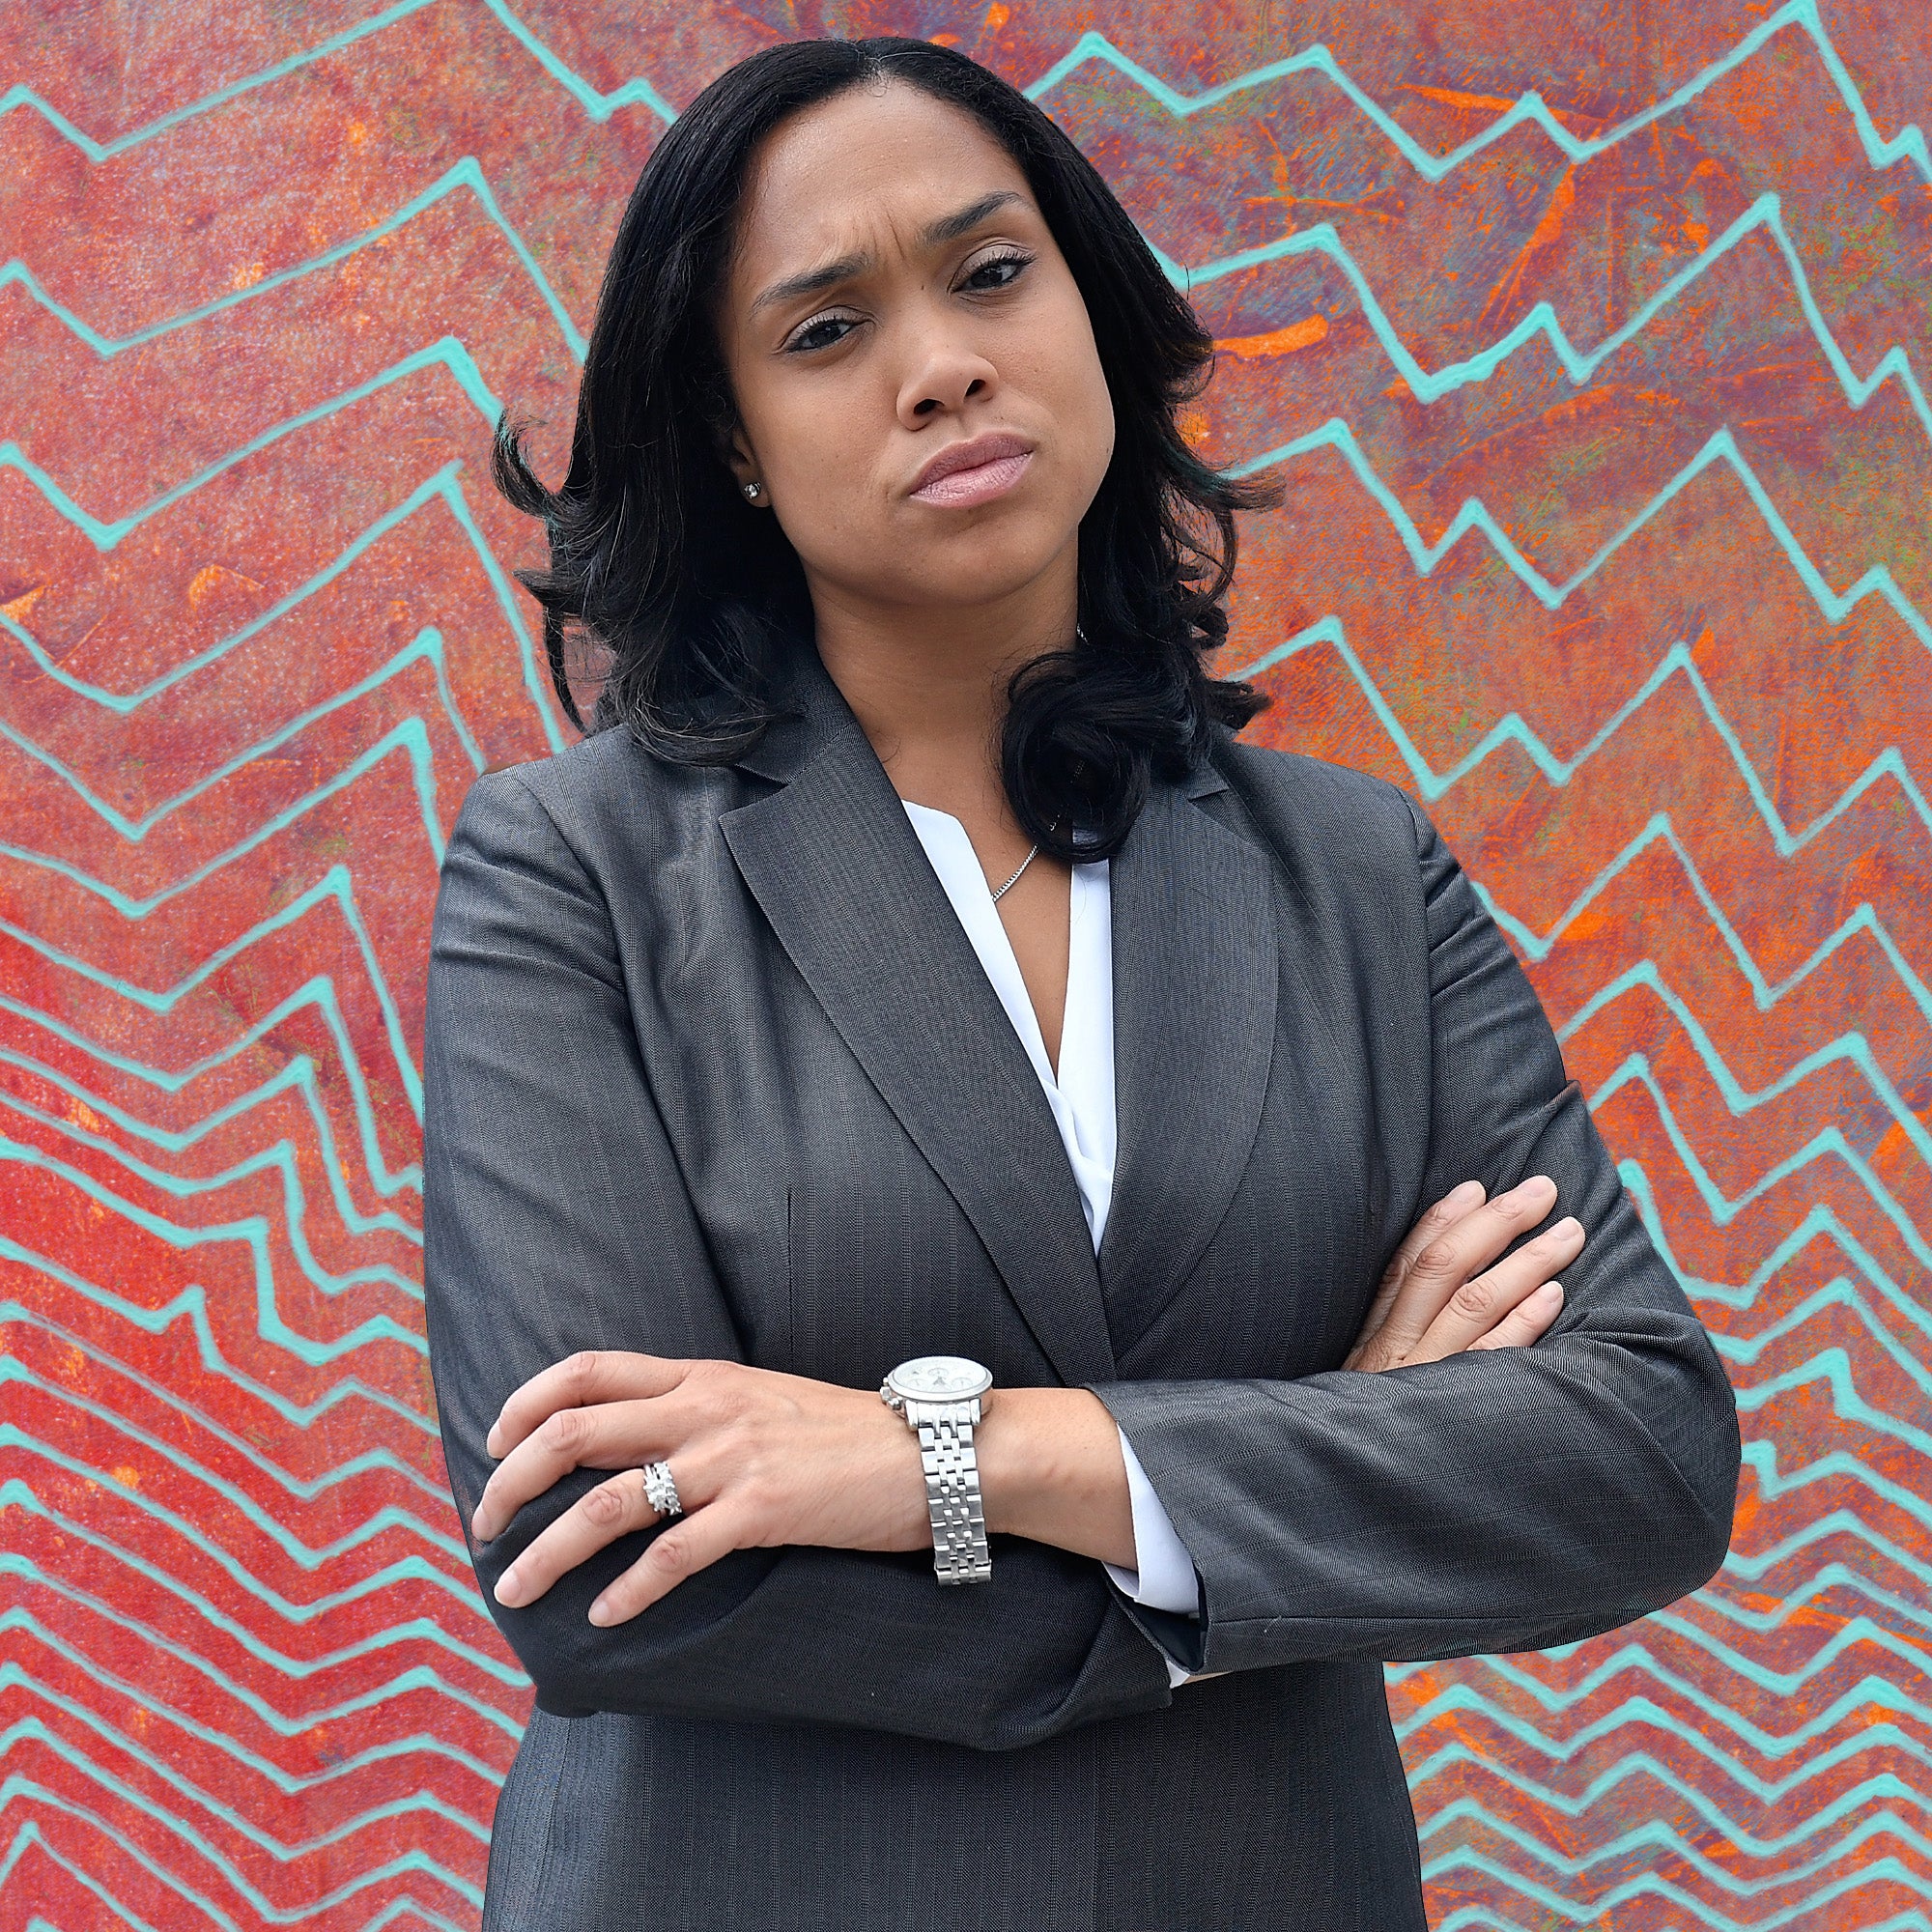 EXCLUSIVE: Baltimore City State's Attorney Marilyn Mosby Gets Candid About Life After Freddie Gray And Her Bid For Re-Election
